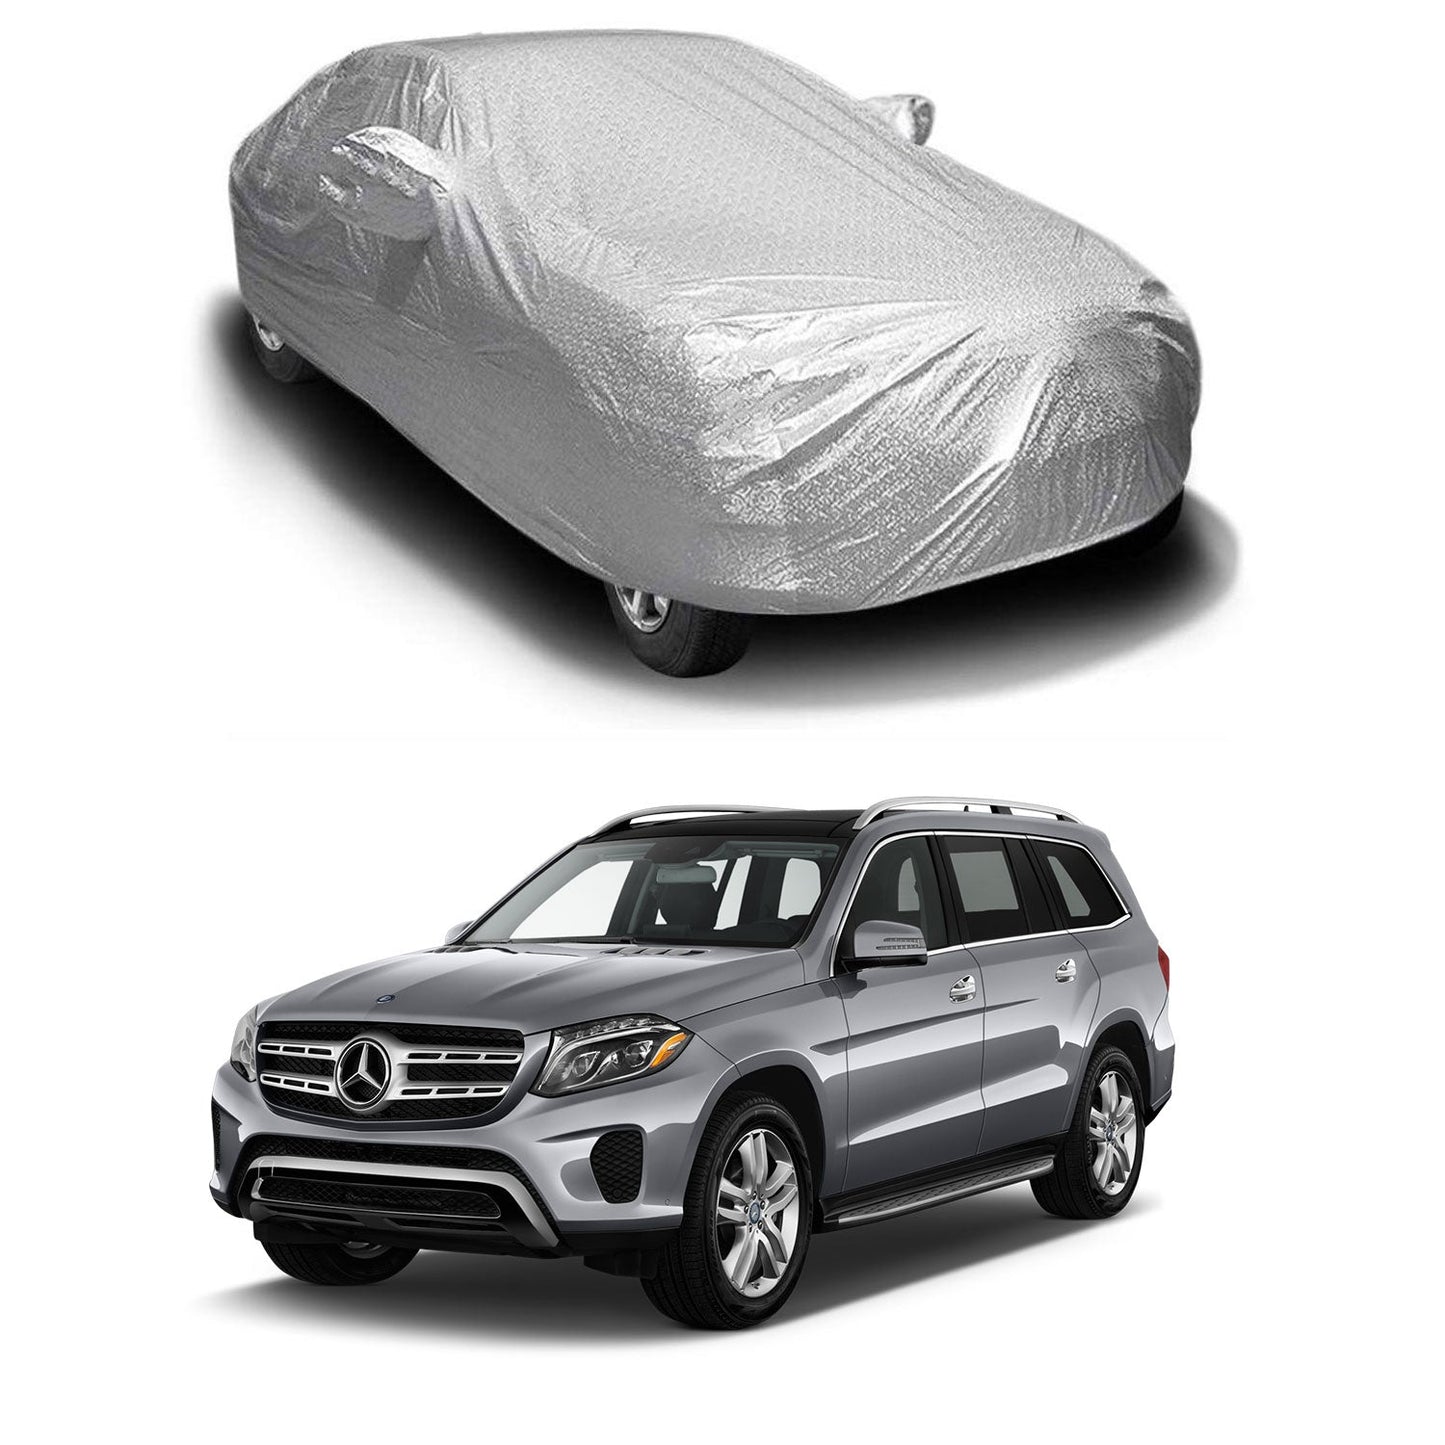 Oshotto Spyro Silver Anti Reflective, dustproof and Water Proof Car Body Cover with Mirror Pockets For Mercedes Benz GLS